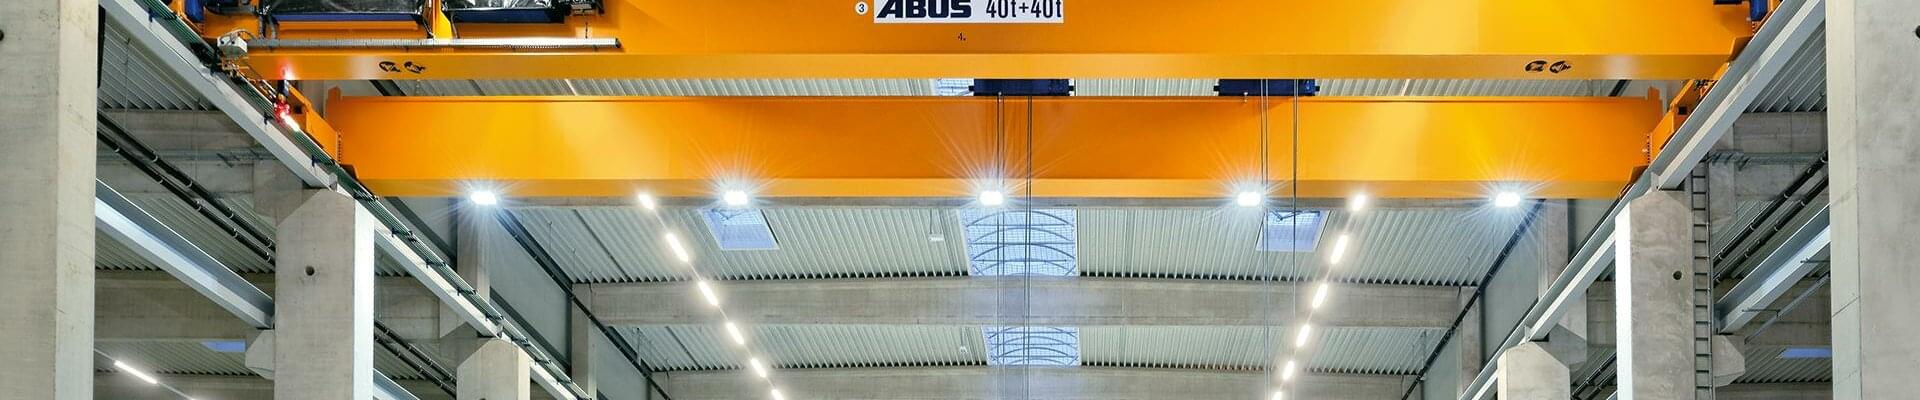 ABUS cranes for heavy goods transport in Germany